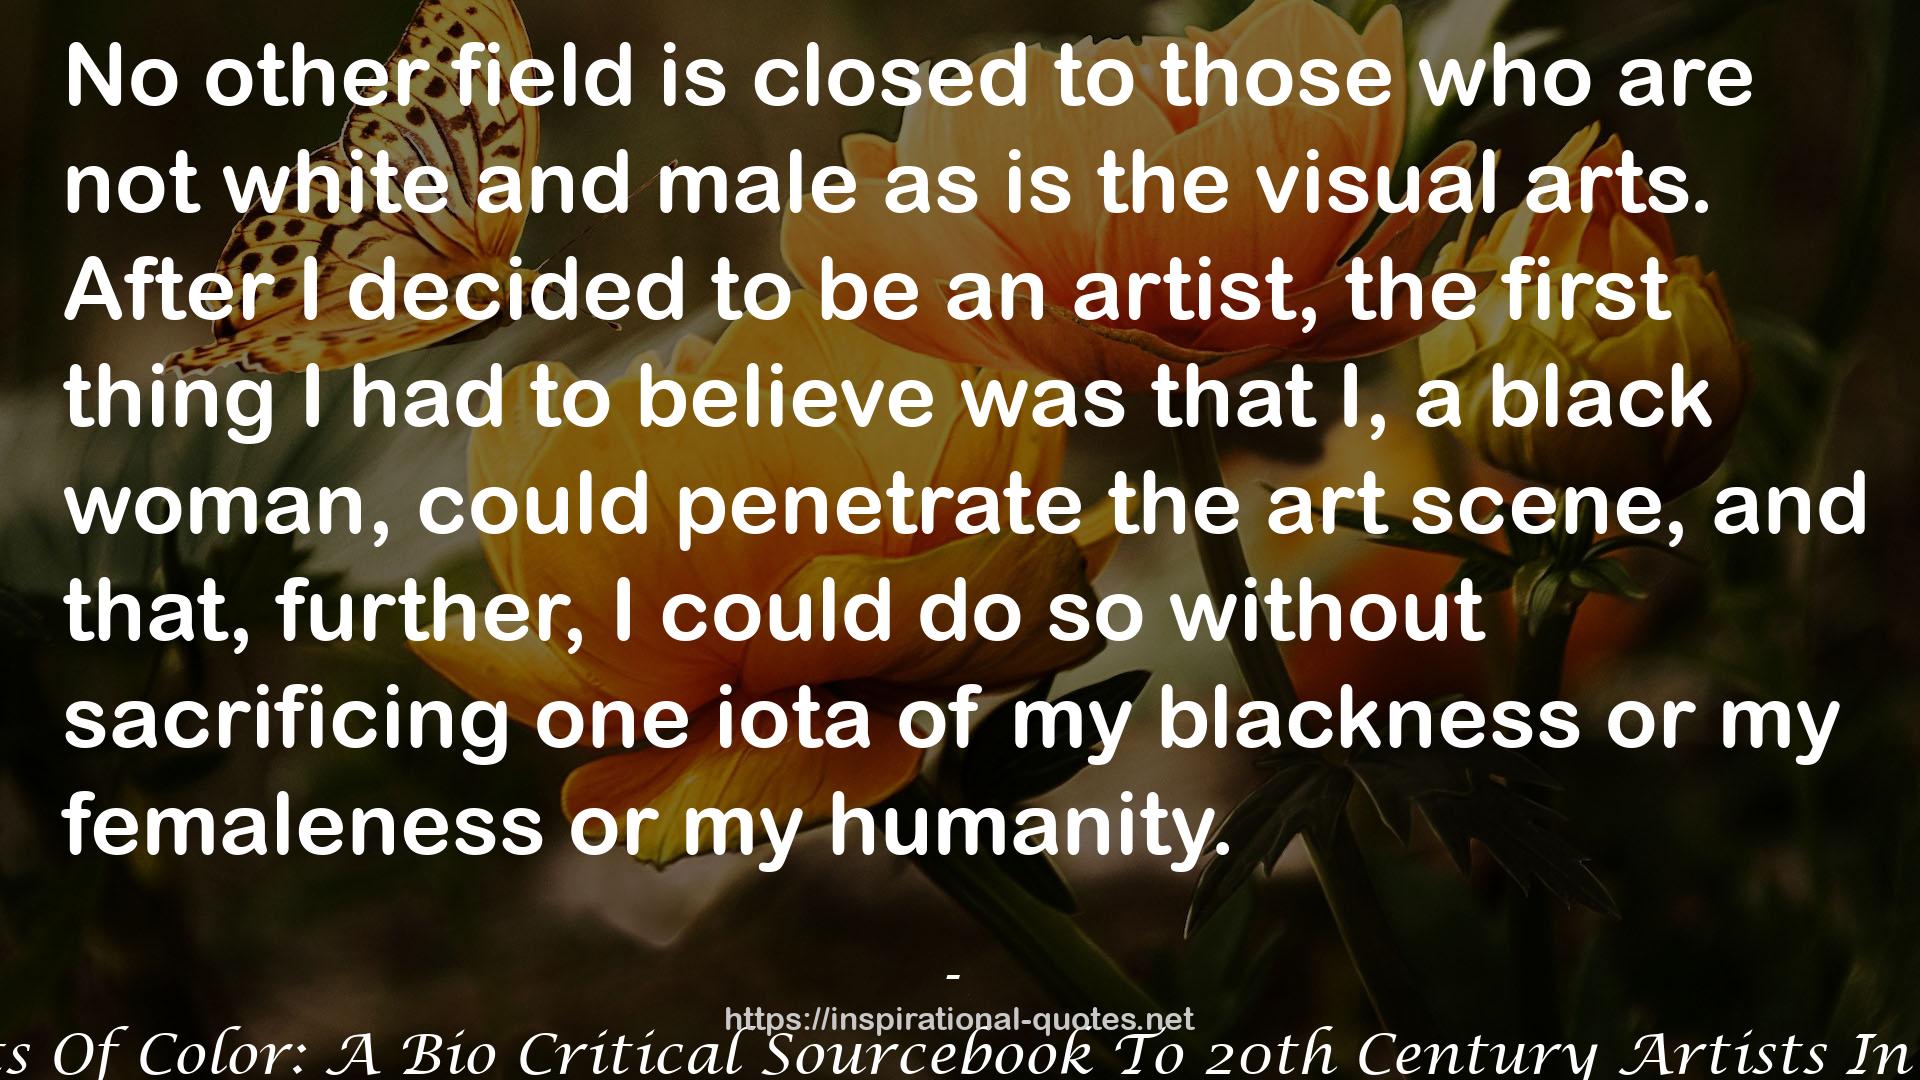 Women Artists Of Color: A Bio Critical Sourcebook To 20th Century Artists In The Americas QUOTES